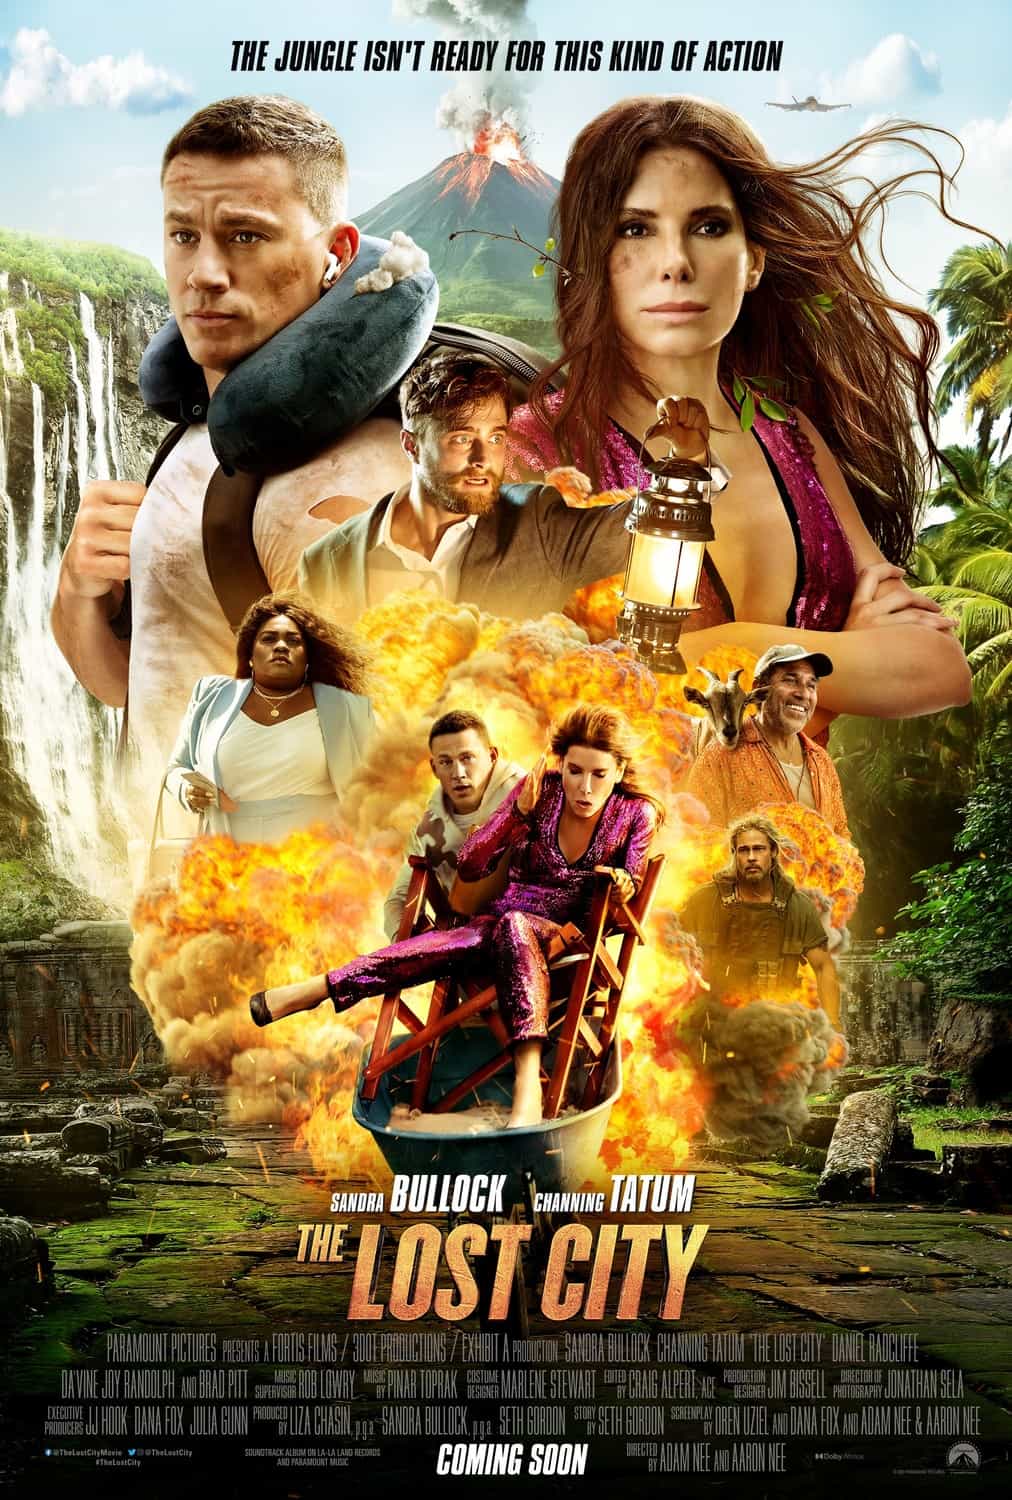 New poster released for The Lost City starring Sandra Bullock - movie UK release date 15th April 2022 #thelostcity